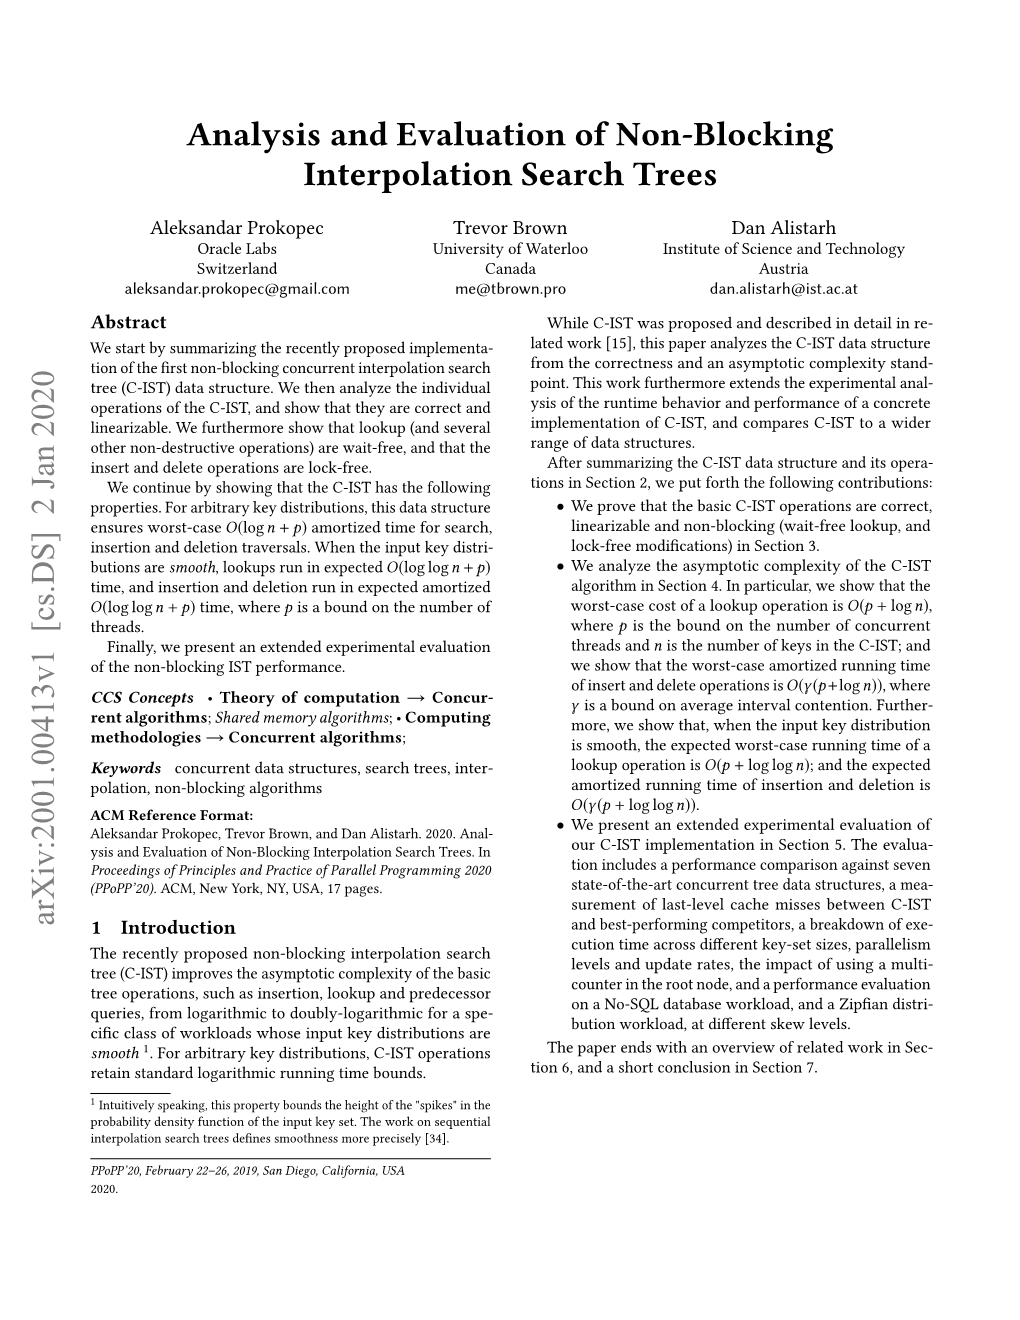 Analysis and Evaluation of Non-Blocking Interpolation Search Trees